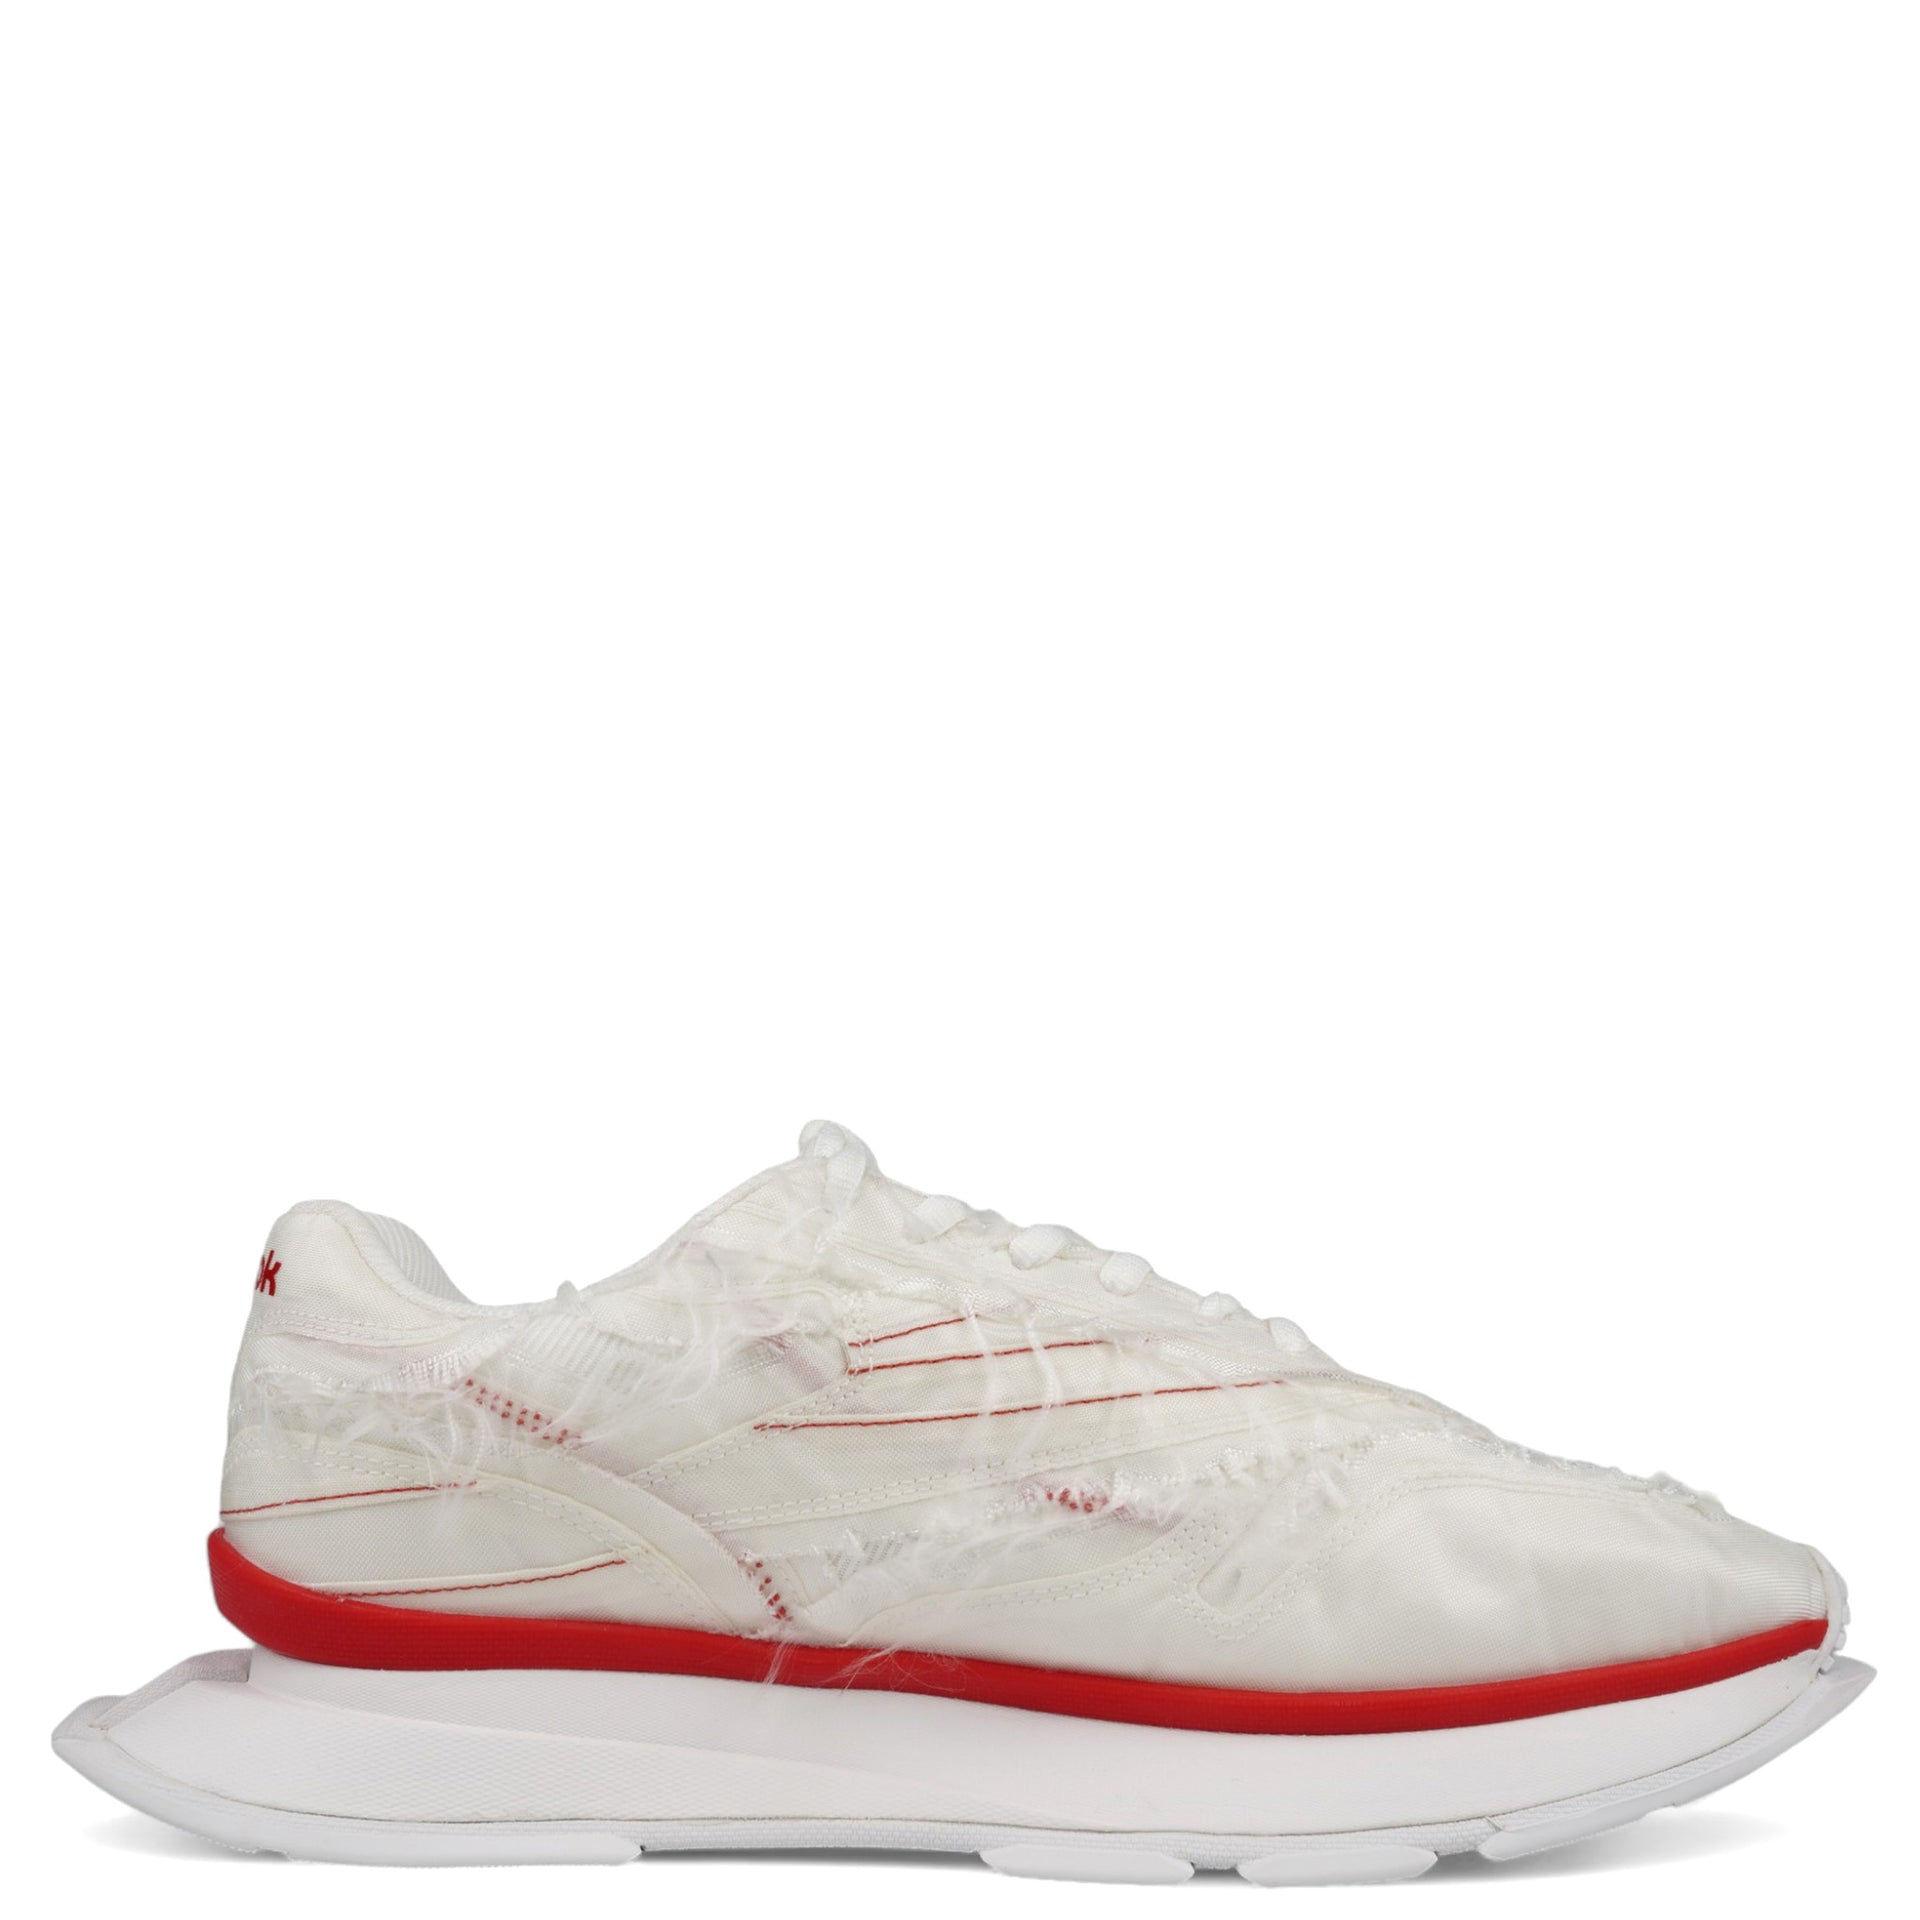 CLASSIC LEATHER LTD / WHITE/RED